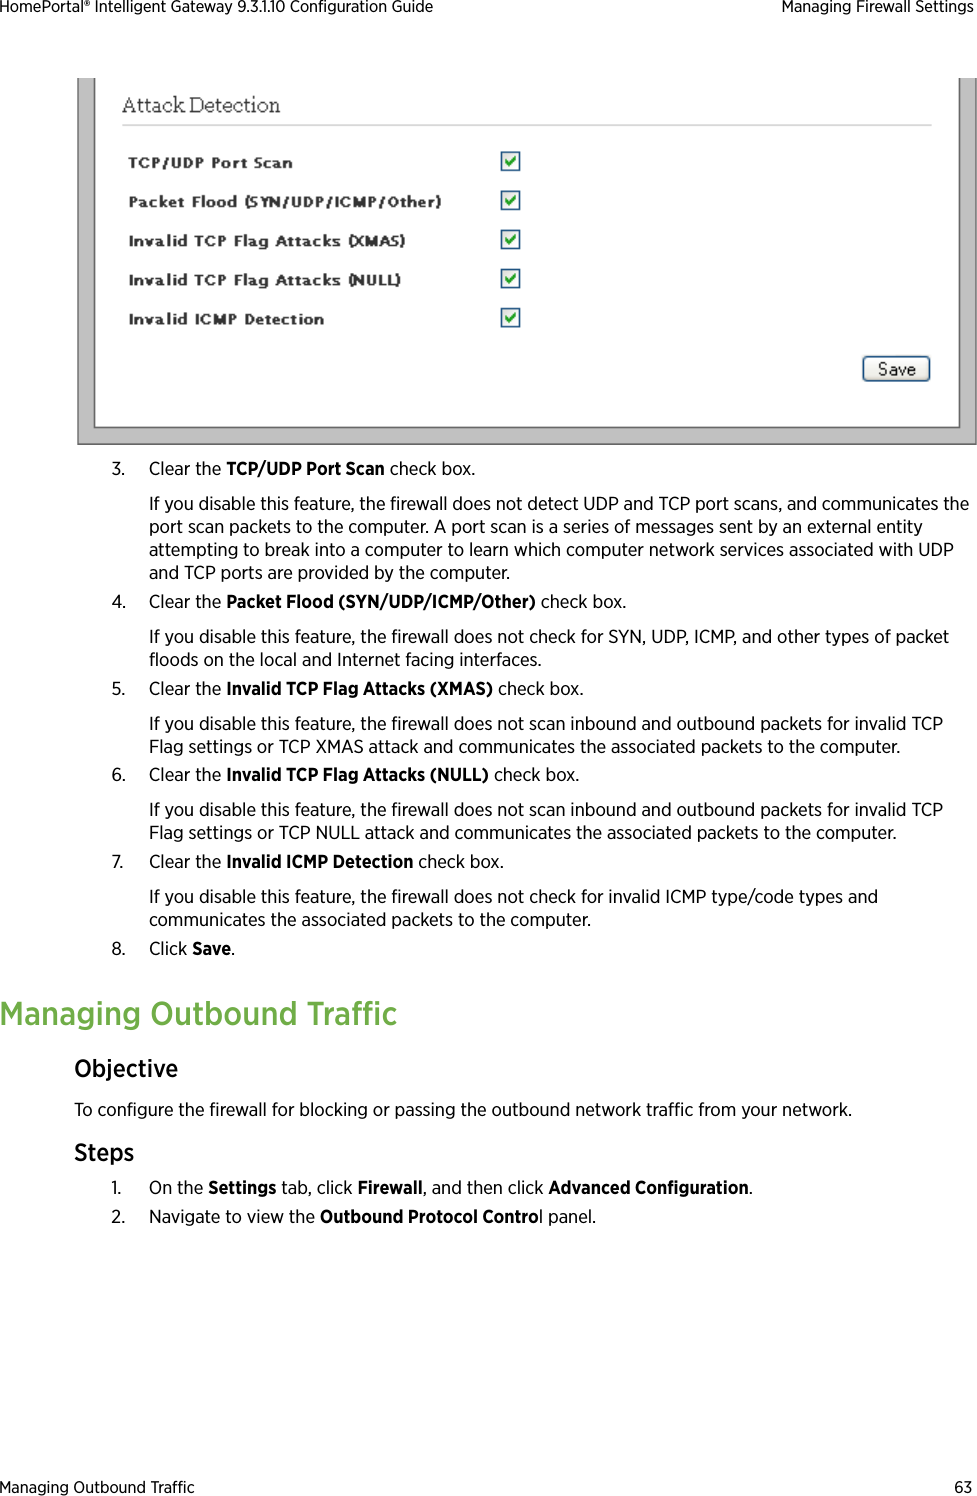 Managing Outbound Traffic 63HomePortal® Intelligent Gateway 9.3.1.10 Configuration Guide Managing Firewall Settings3. Clear the TCP/UDP Port Scan check box. If you disable this feature, the firewall does not detect UDP and TCP port scans, and communicates the port scan packets to the computer. A port scan is a series of messages sent by an external entity attempting to break into a computer to learn which computer network services associated with UDP and TCP ports are provided by the computer.4. Clear the Packet Flood (SYN/UDP/ICMP/Other) check box.If you disable this feature, the firewall does not check for SYN, UDP, ICMP, and other types of packet floods on the local and Internet facing interfaces.5. Clear the Invalid TCP Flag Attacks (XMAS) check box.If you disable this feature, the firewall does not scan inbound and outbound packets for invalid TCP Flag settings or TCP XMAS attack and communicates the associated packets to the computer.6. Clear the Invalid TCP Flag Attacks (NULL) check box.If you disable this feature, the firewall does not scan inbound and outbound packets for invalid TCP Flag settings or TCP NULL attack and communicates the associated packets to the computer.7. Clear the Invalid ICMP Detection check box.If you disable this feature, the firewall does not check for invalid ICMP type/code types and communicates the associated packets to the computer.8. Click Save.Managing Outbound TrafficObjectiveTo configure the firewall for blocking or passing the outbound network traffic from your network.Steps1. On the Settings tab, click Firewall, and then click Advanced Configuration.2. Navigate to view the Outbound Protocol Control panel.